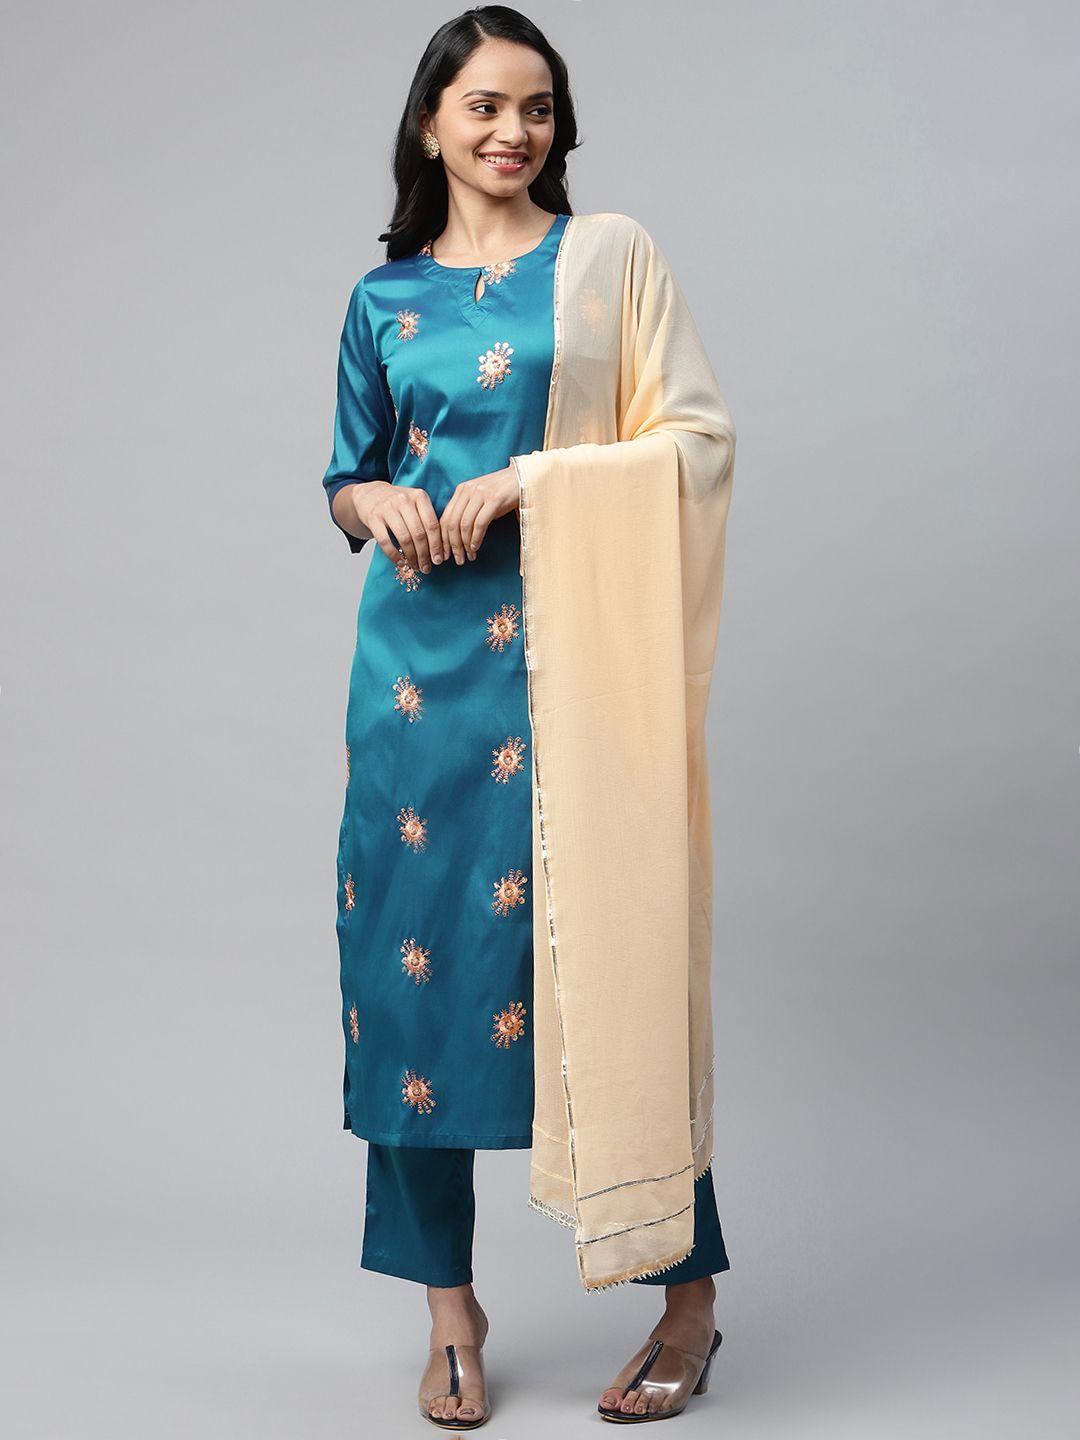 v tradition women blue floral embroidered kurta with palazzos & with dupatta